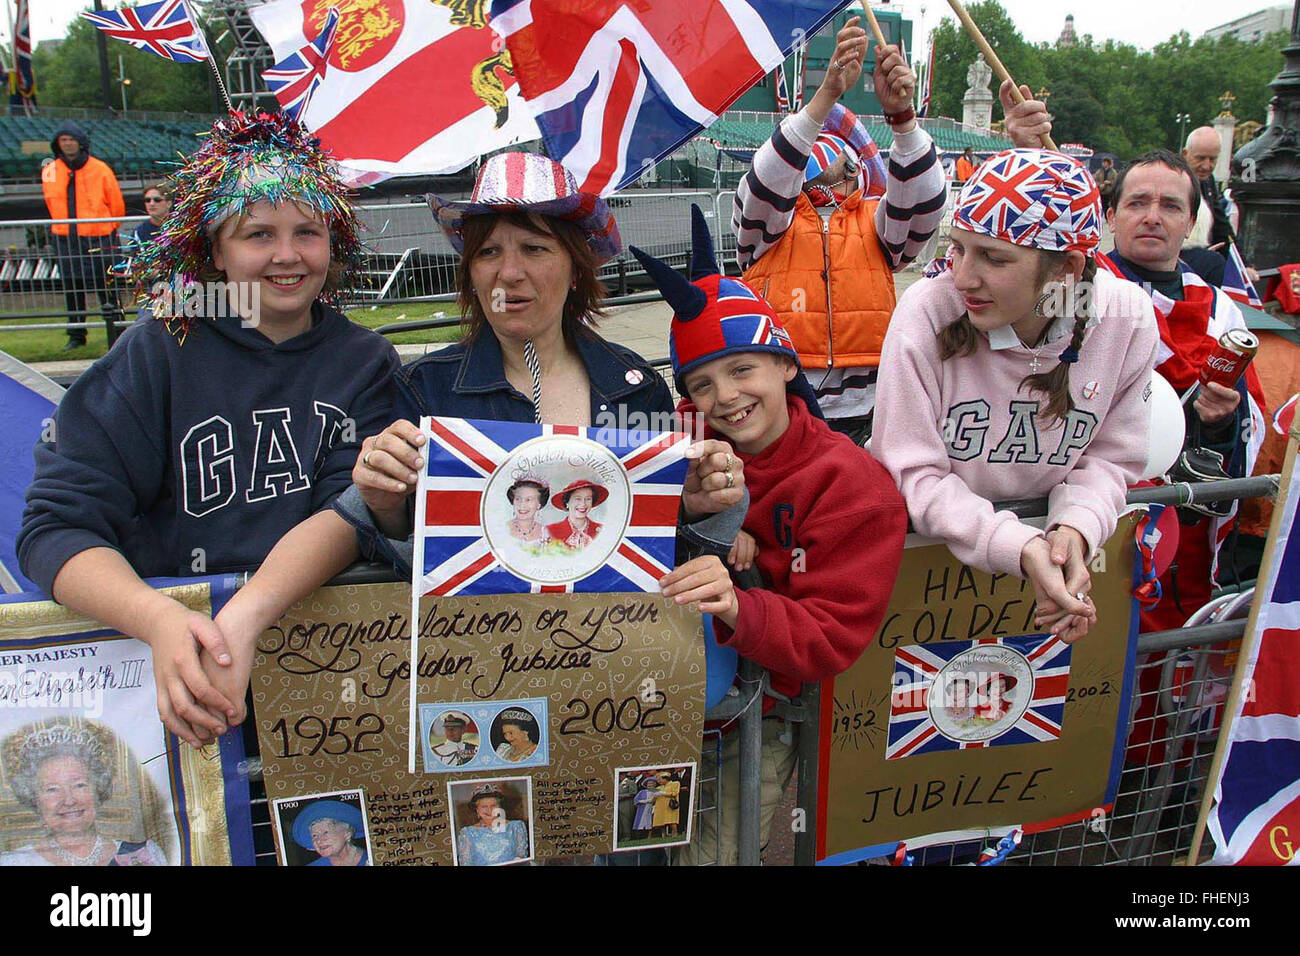 A family from London who camped out overnight outside Buckingham Palace to secure the best viewing positions for the two-day Golden Jubilee celebrations to mark the 50 year reign of Queen Elizabeth II. Celebrations took place across the United Kingdom with the centrepiece a parade and fireworks at Buckingham Palace, the Queen's London residency. Queen Elizabeth ascended to the British throne in 1952 upon the death of her father, King George VI. Stock Photo